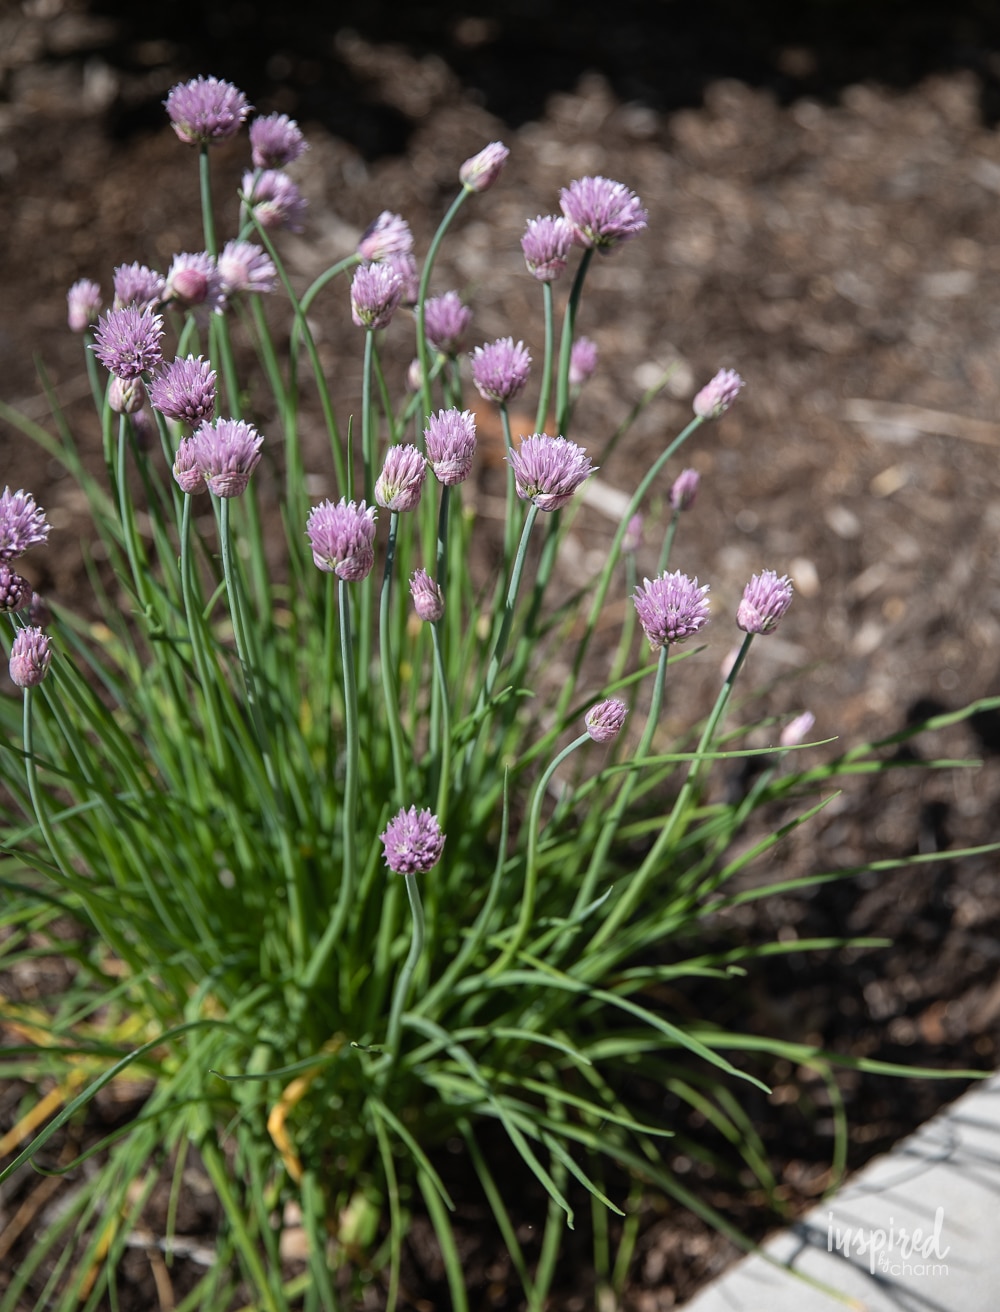 chive plant with chive blossoms.